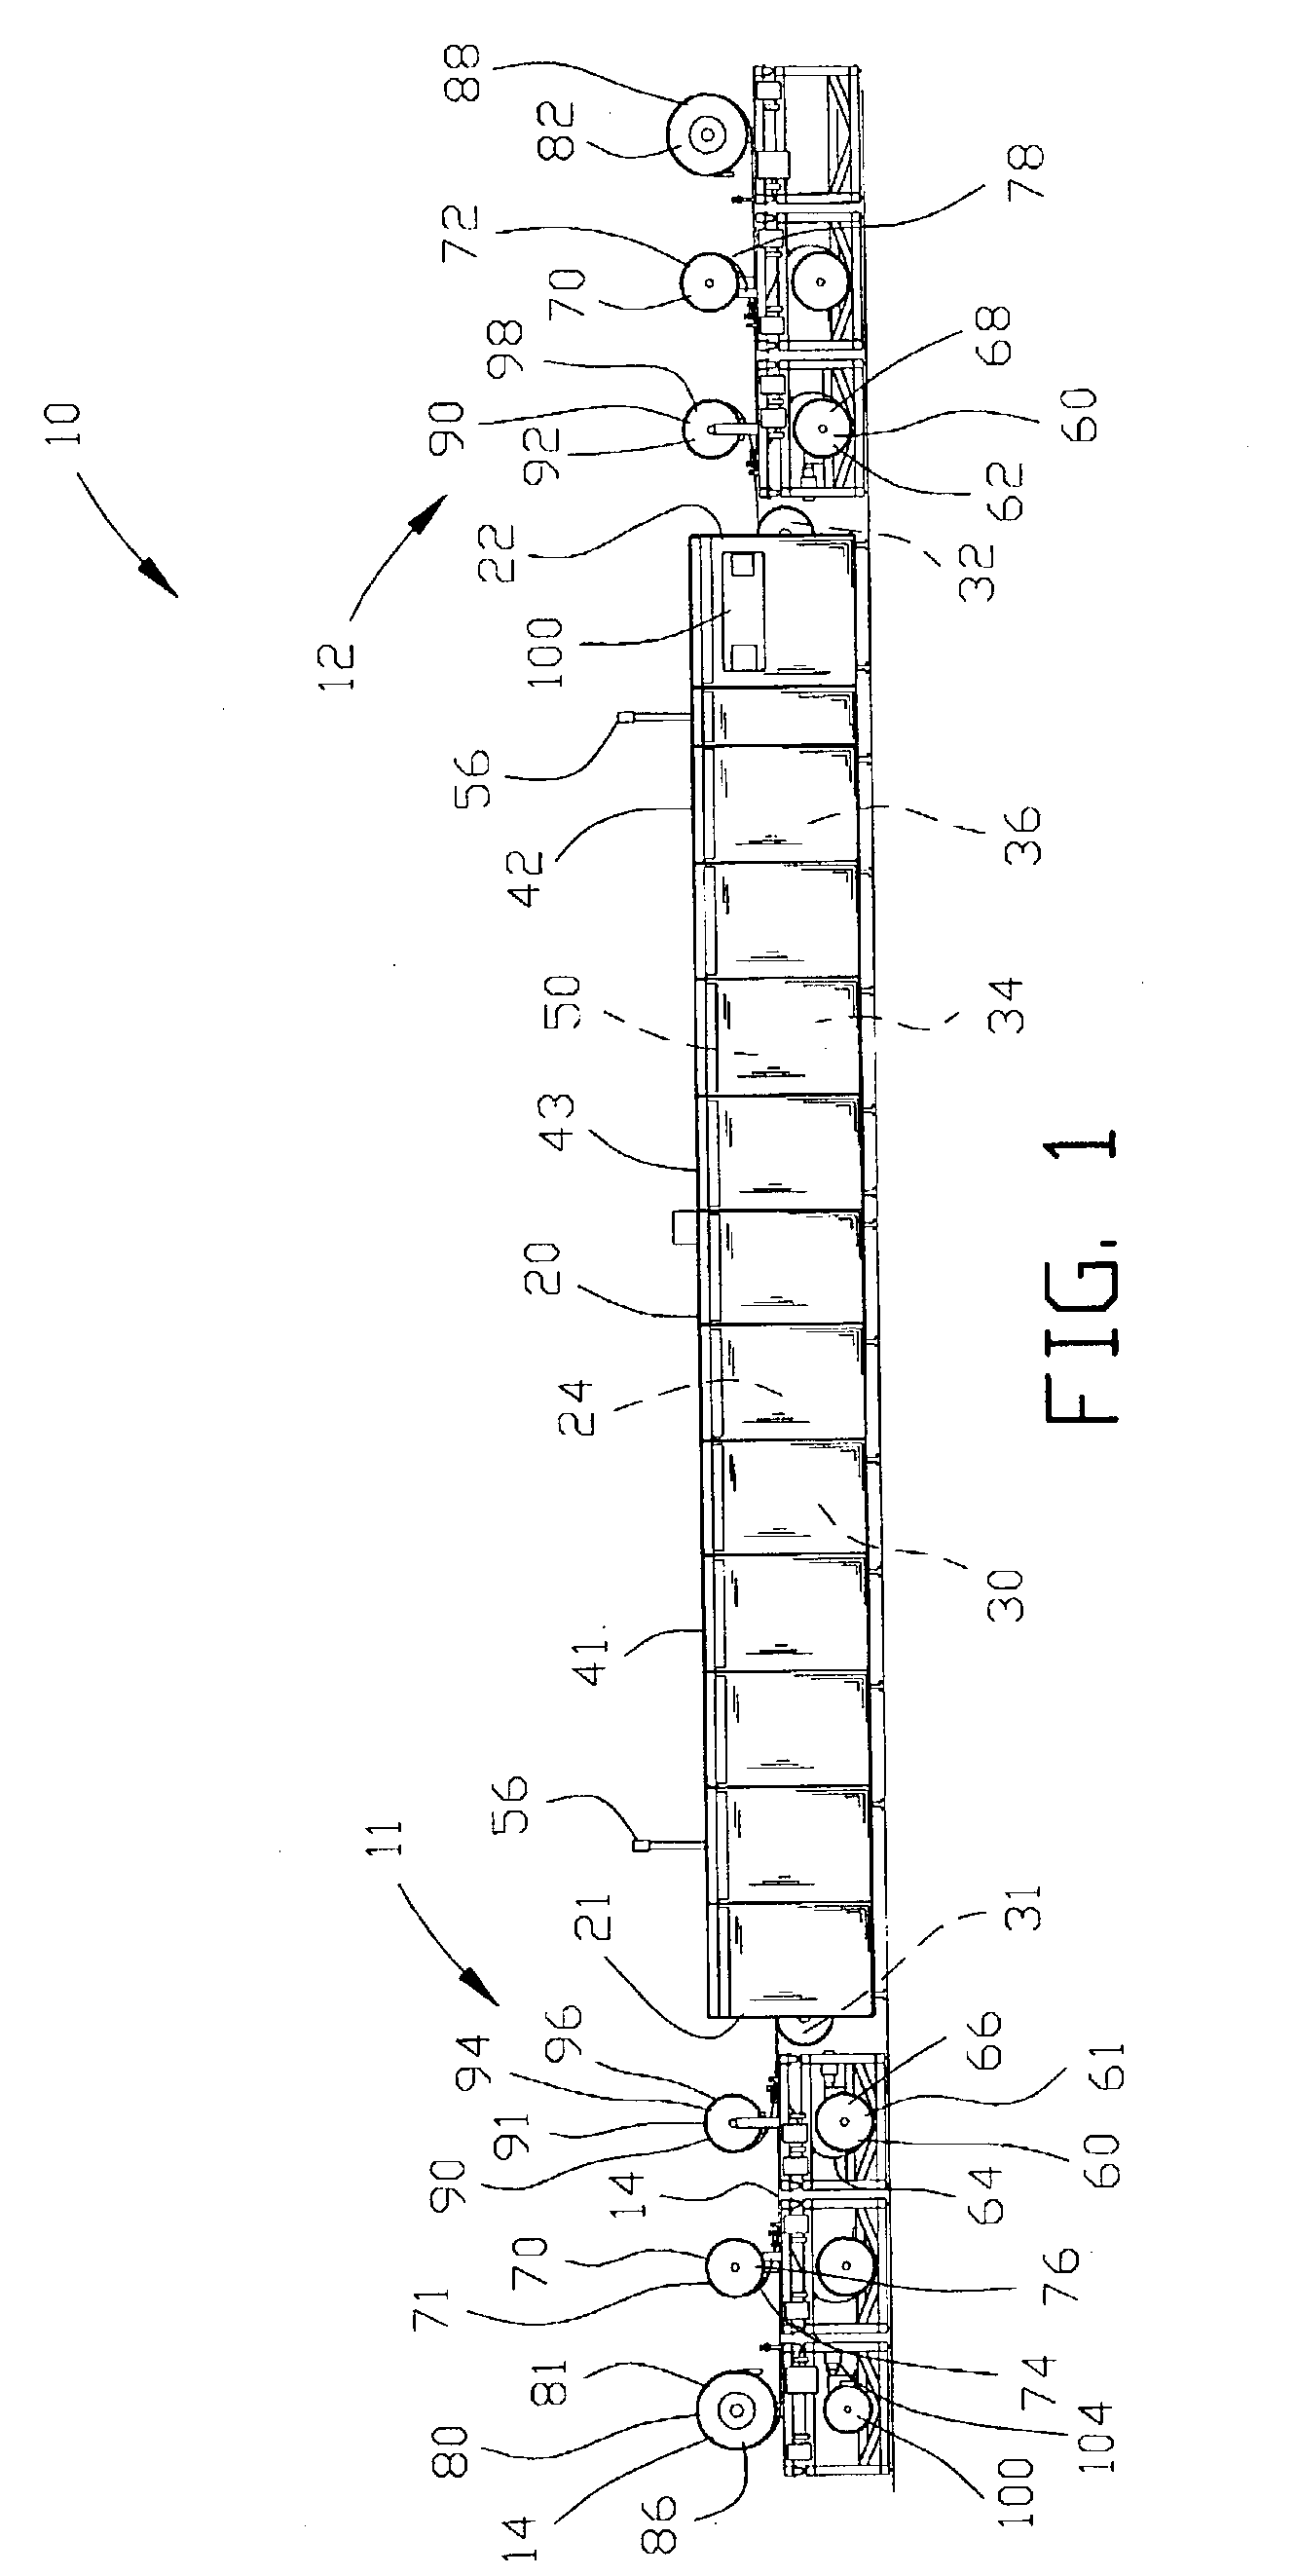 Apparatus and method of continuous sintering a web material